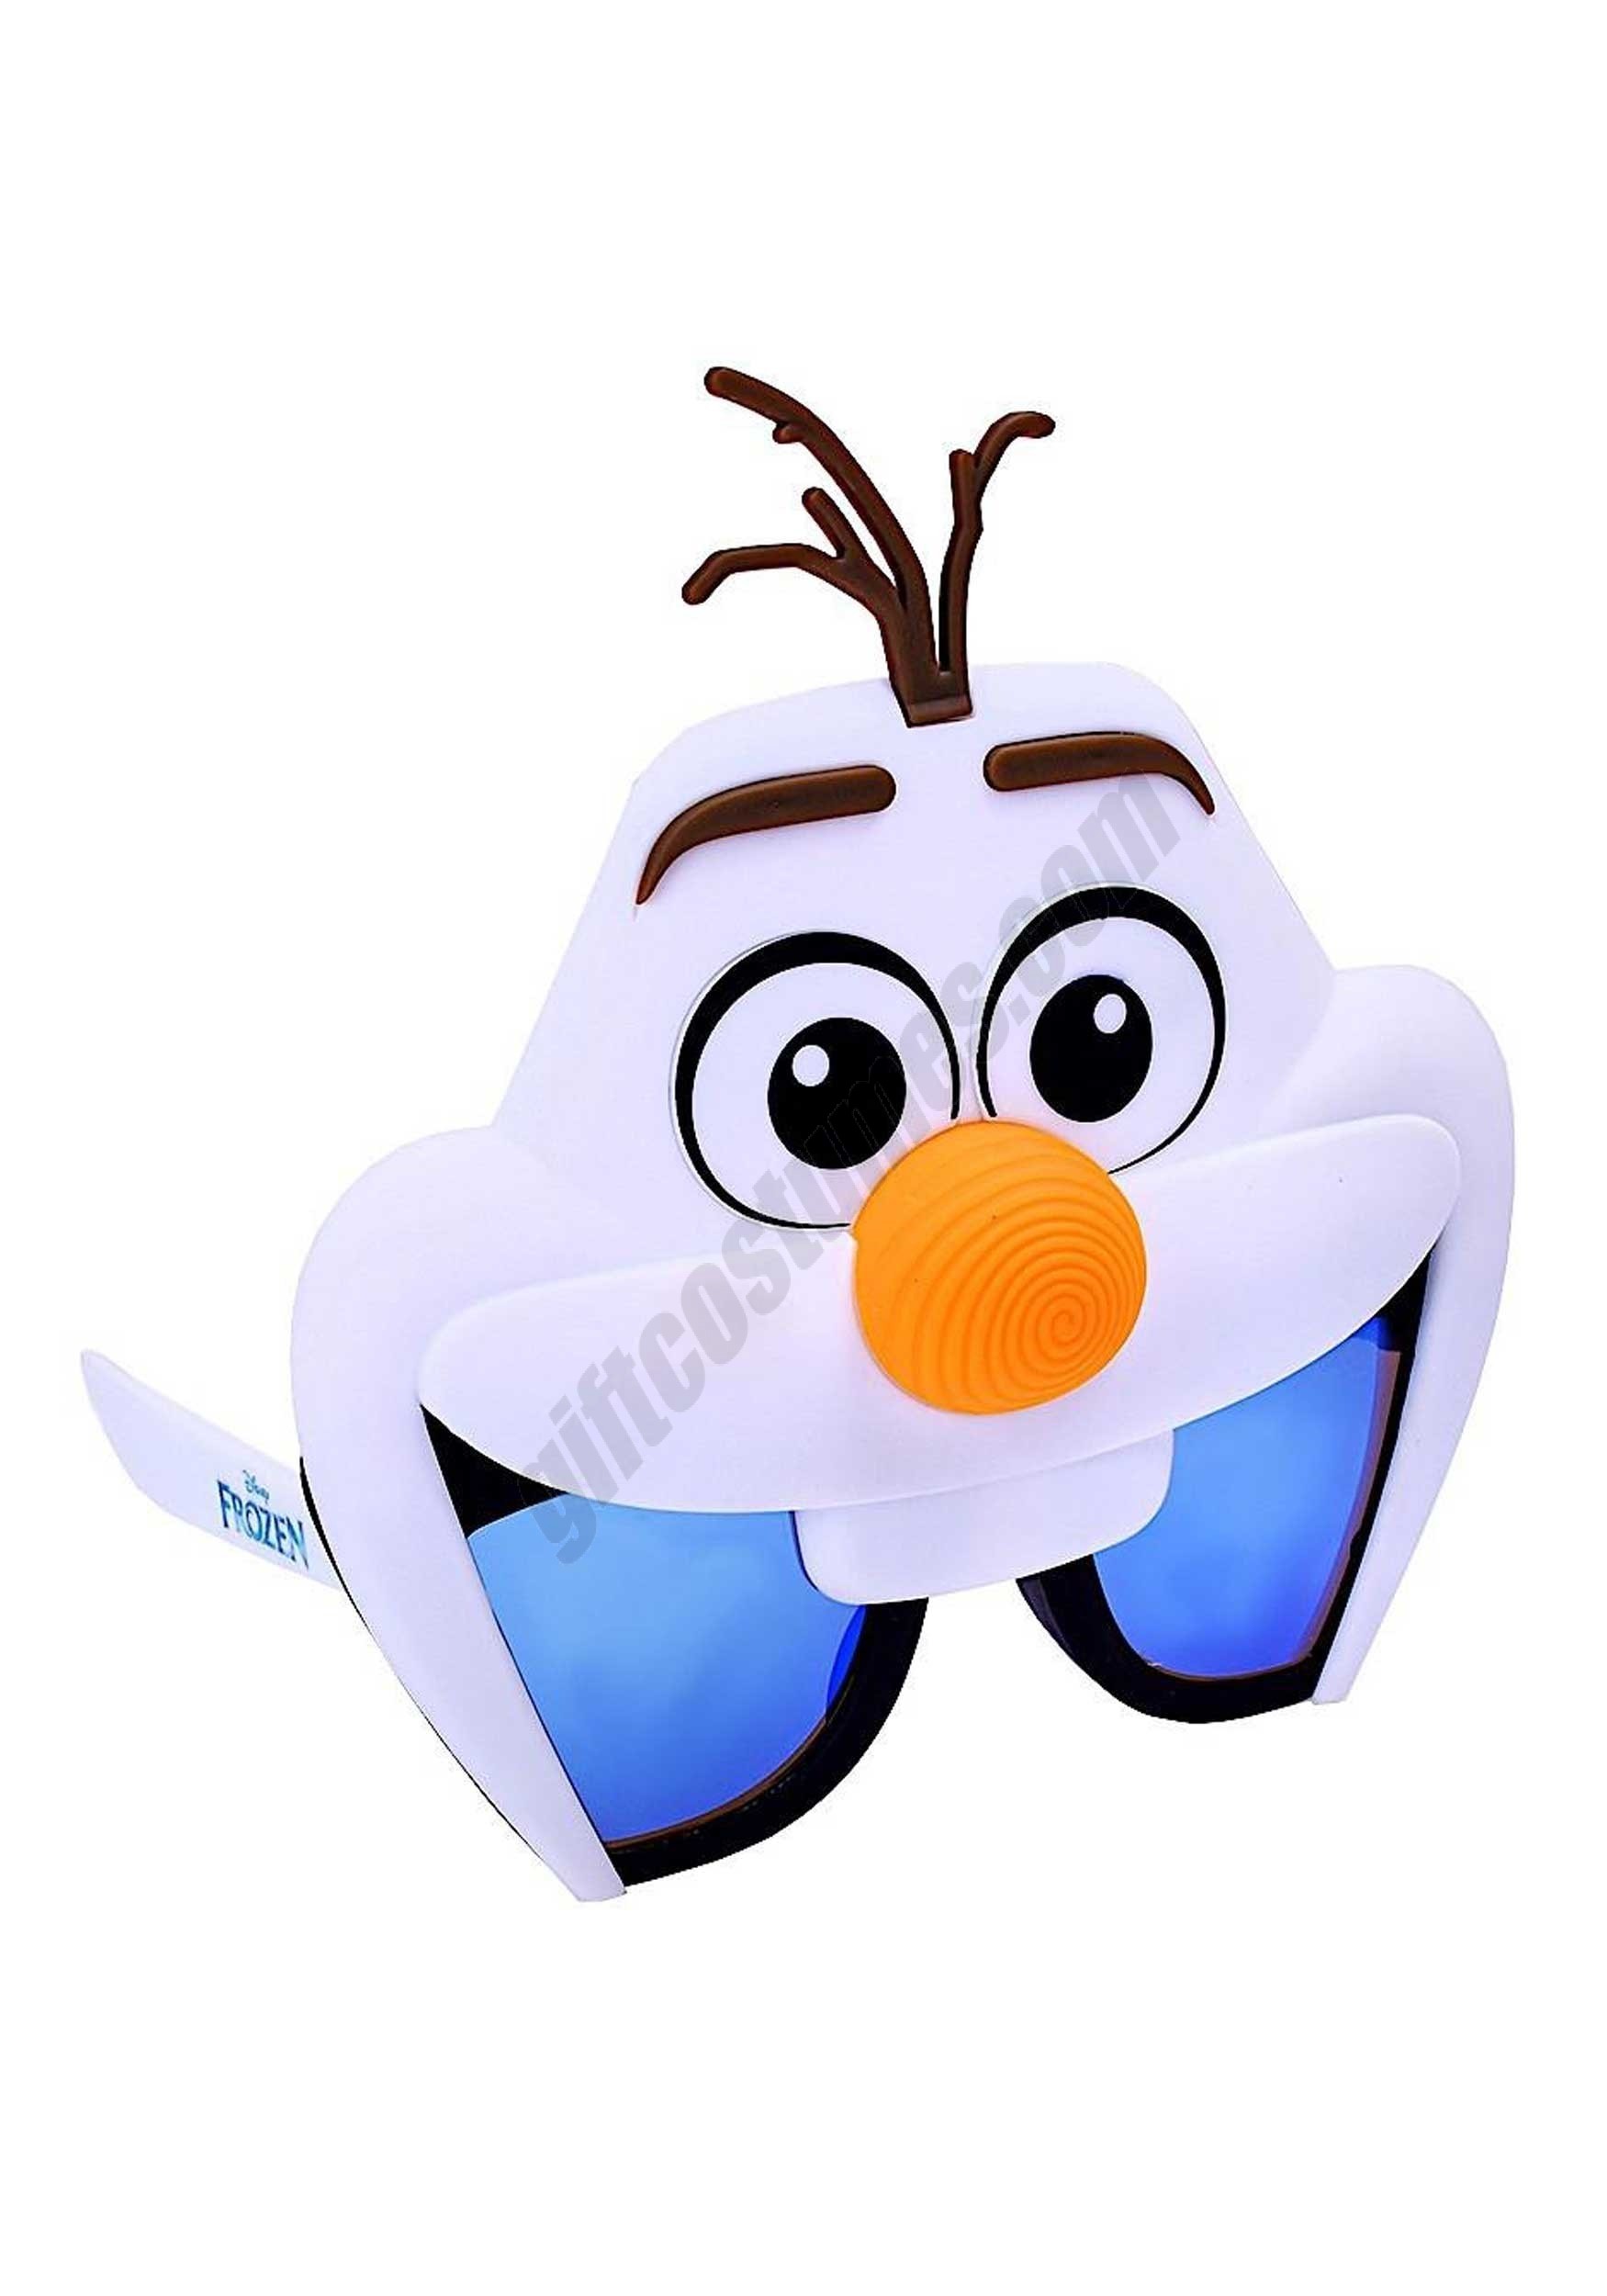 Frozen Olaf Glasses Promotions - Frozen Olaf Glasses Promotions